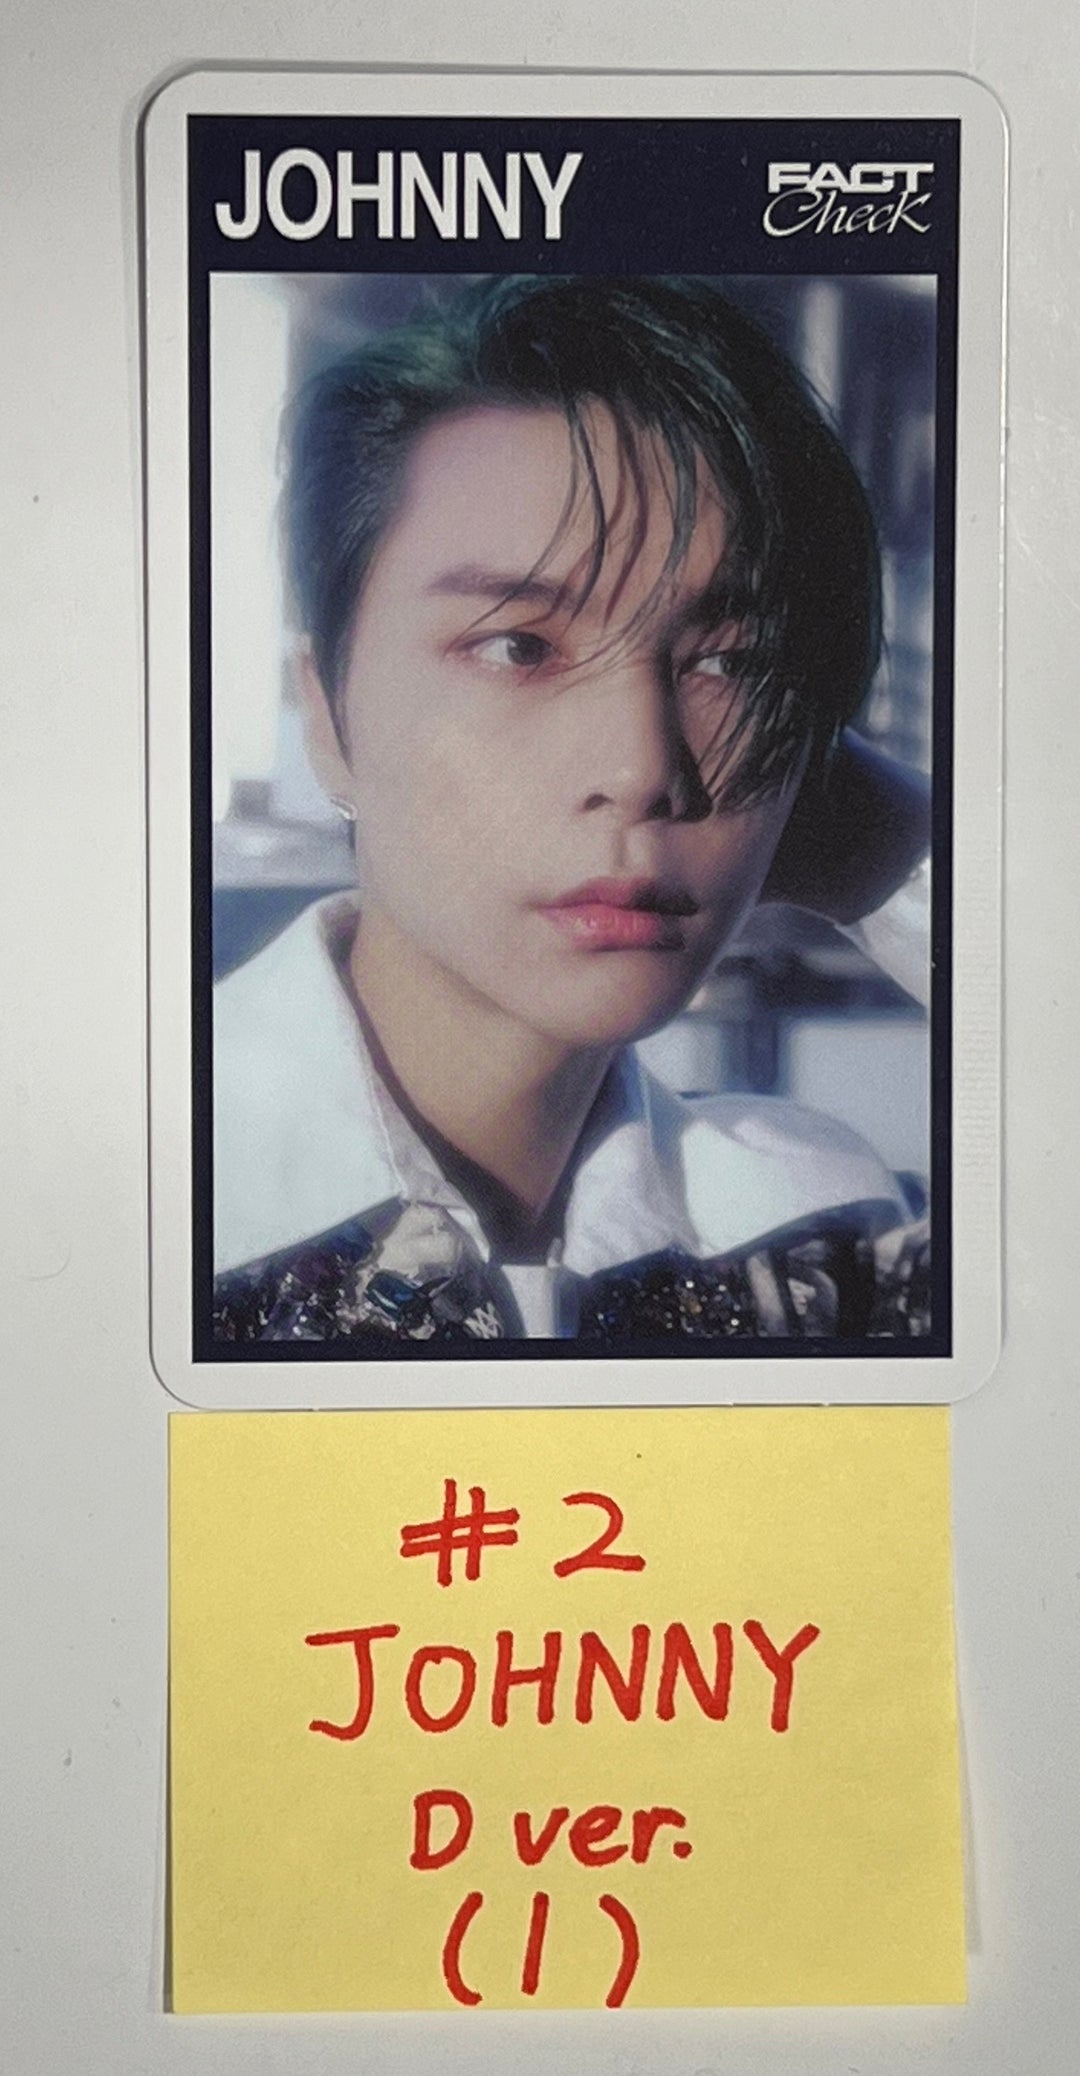 NCT 127 "Fact Check" 不可思議 展 : NCT 127 The 5th Album - SM Town Pop-Up Trading Photocard [D Ver] [23.12.19]